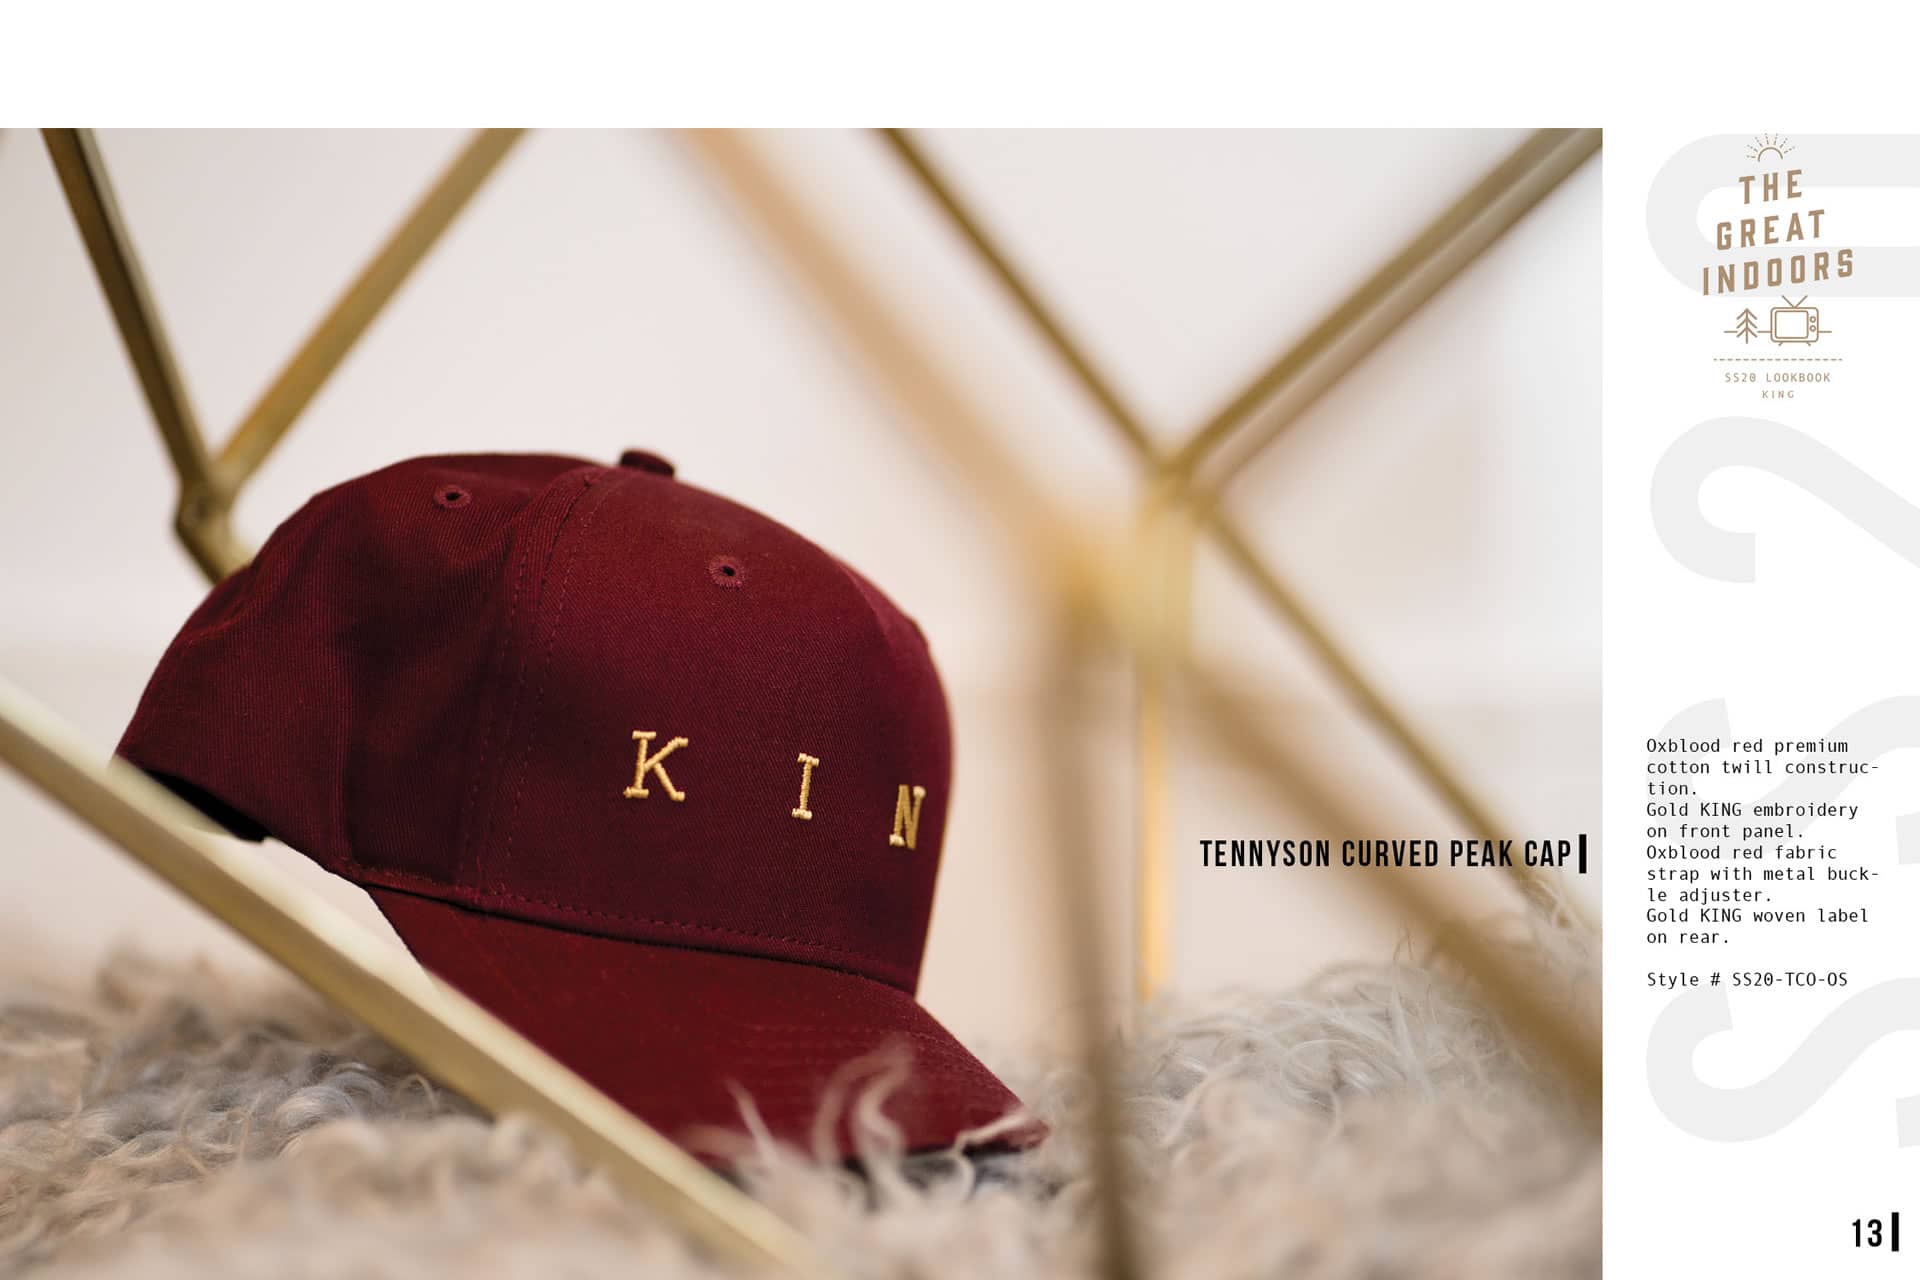 King Apparel Tennyson Gold curved peak cap in oxblood red